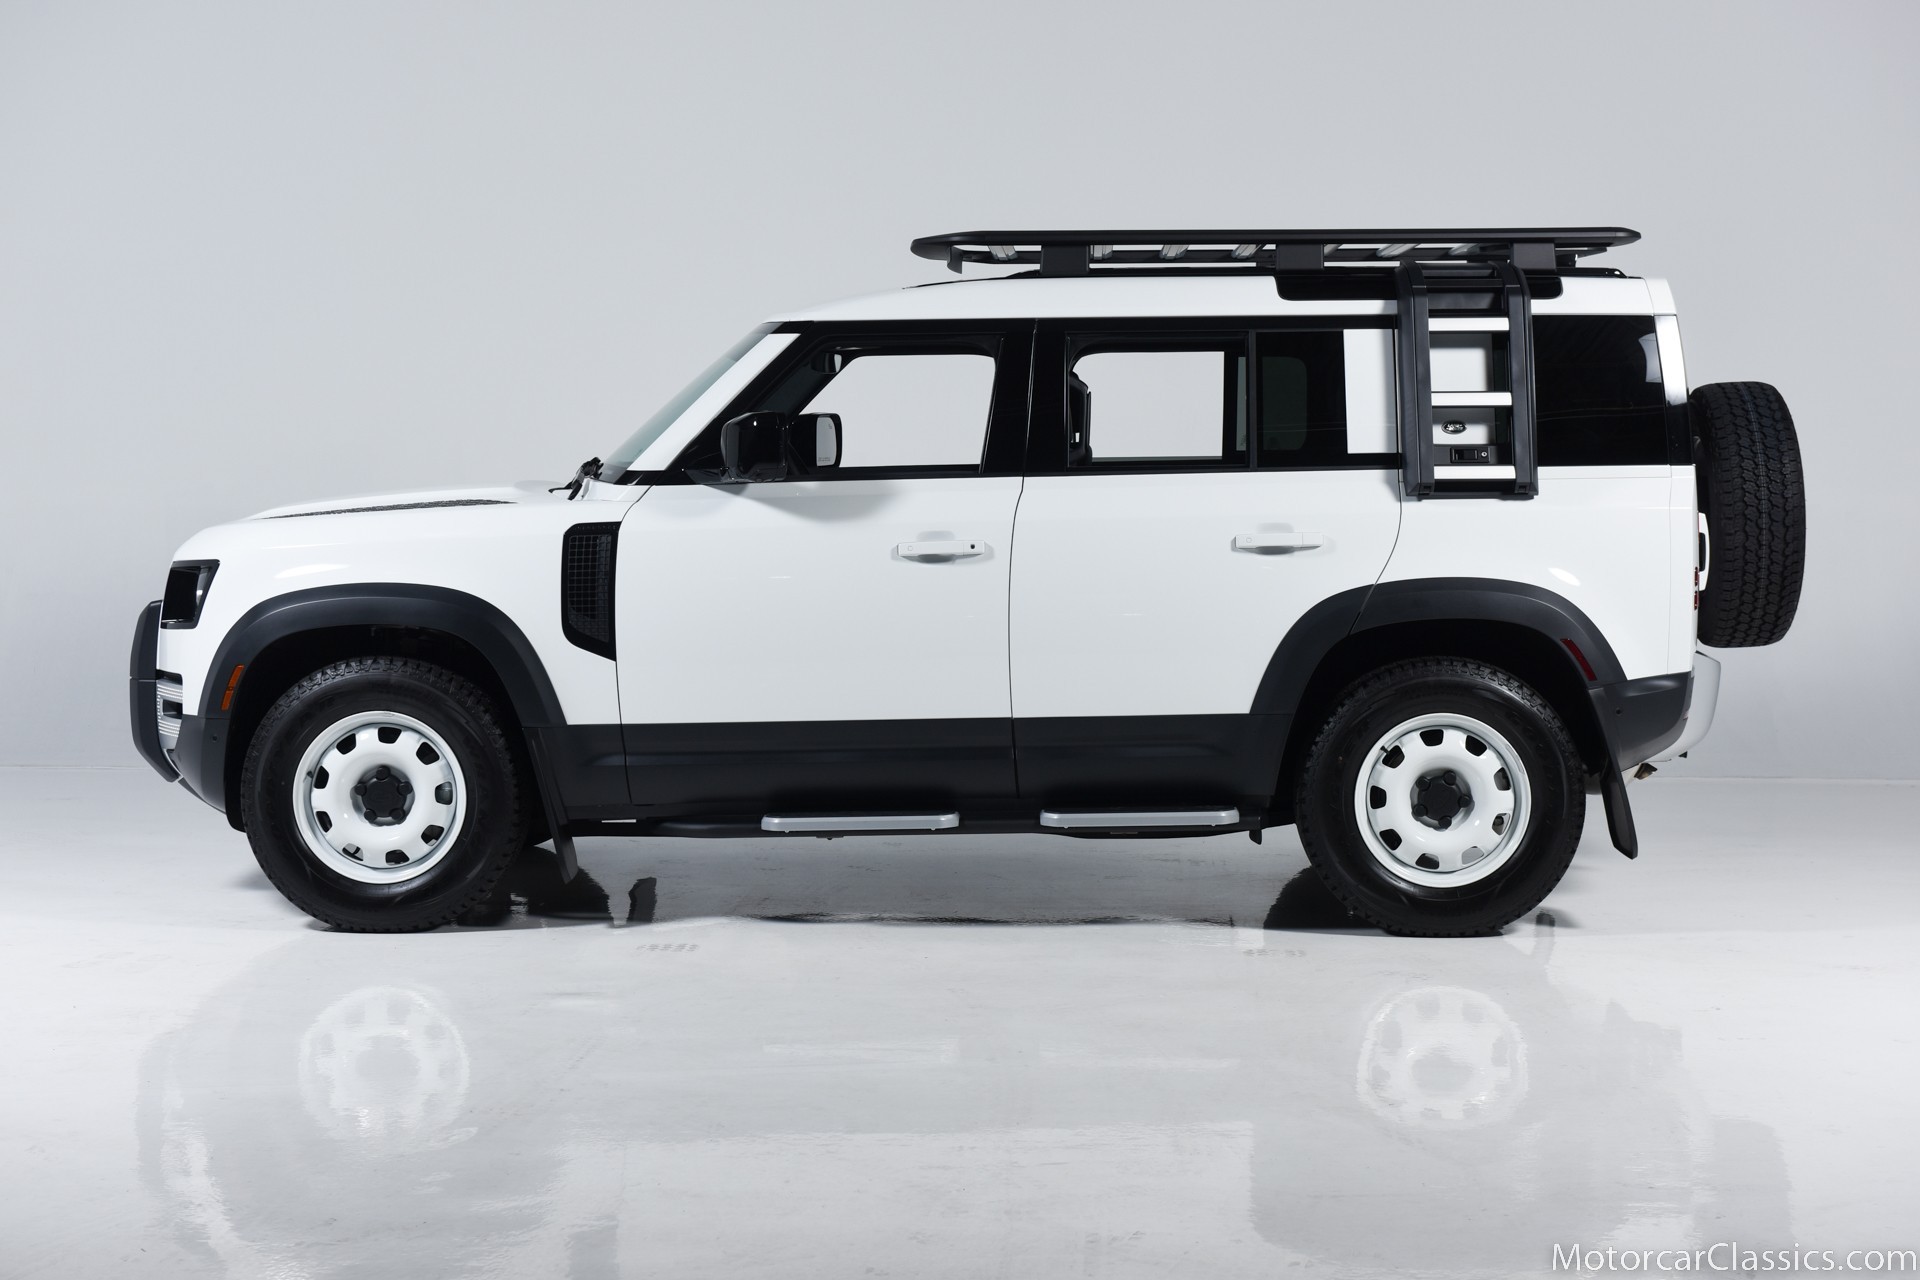 One-of-500 2023 Land Rover Defender 110 30th Anniversary Is Up for